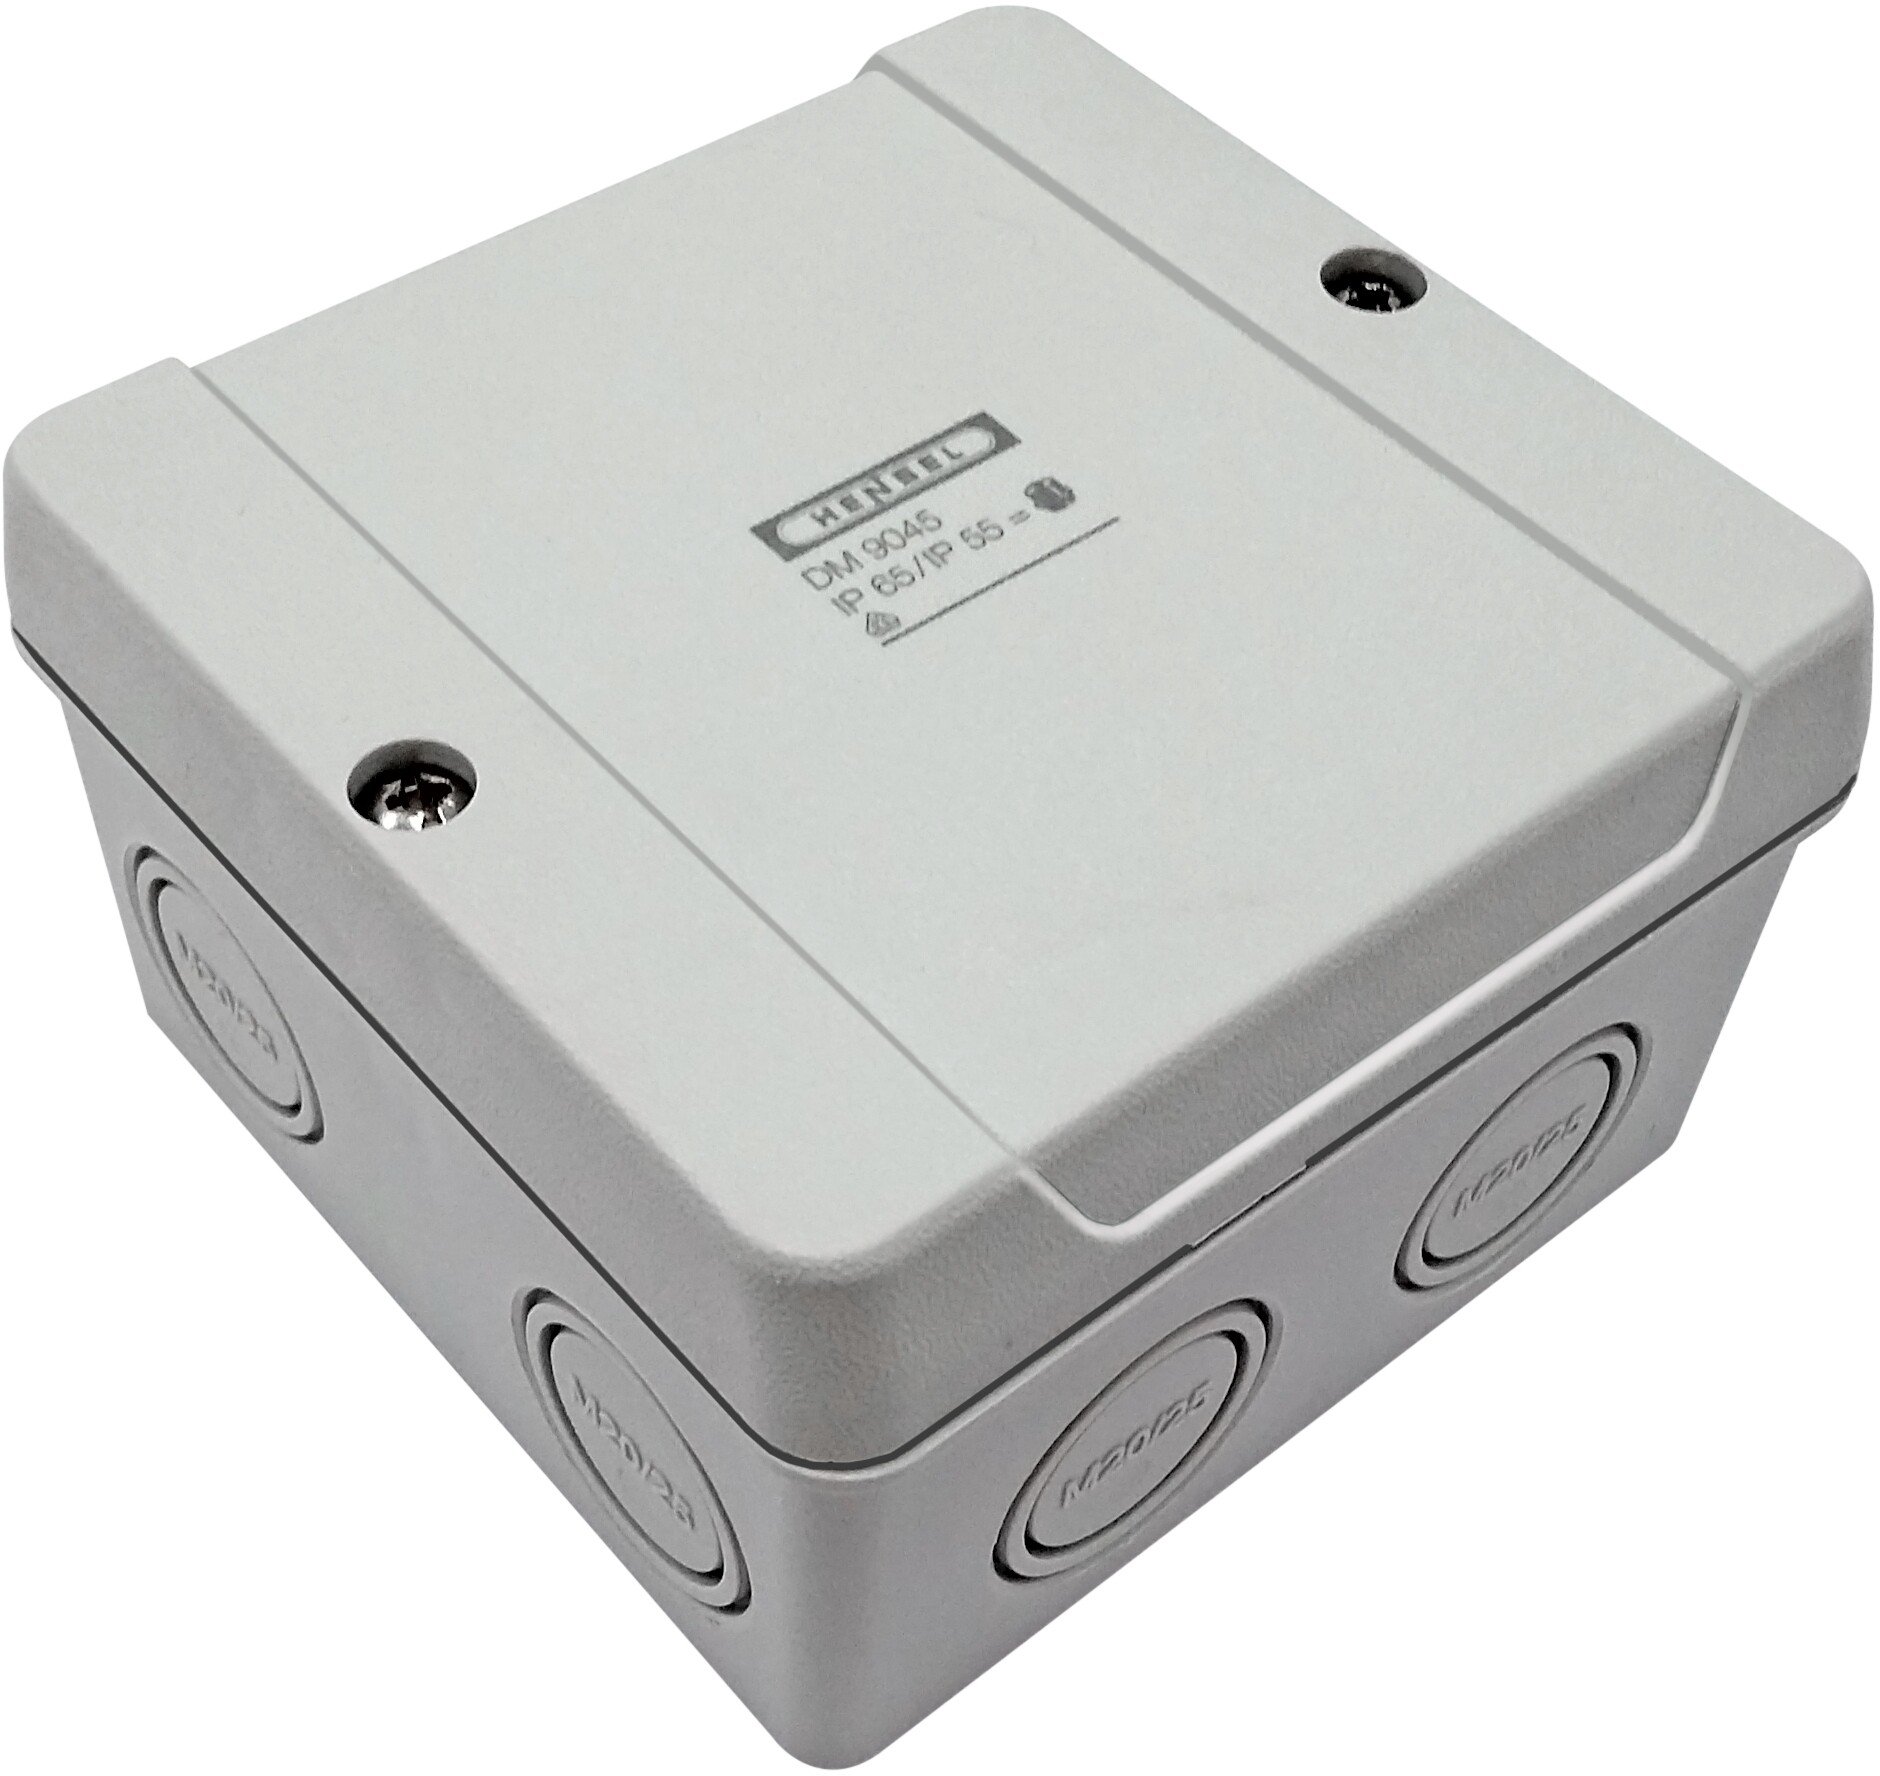 Junction Box ETH-JB-1800 - Frost Protection